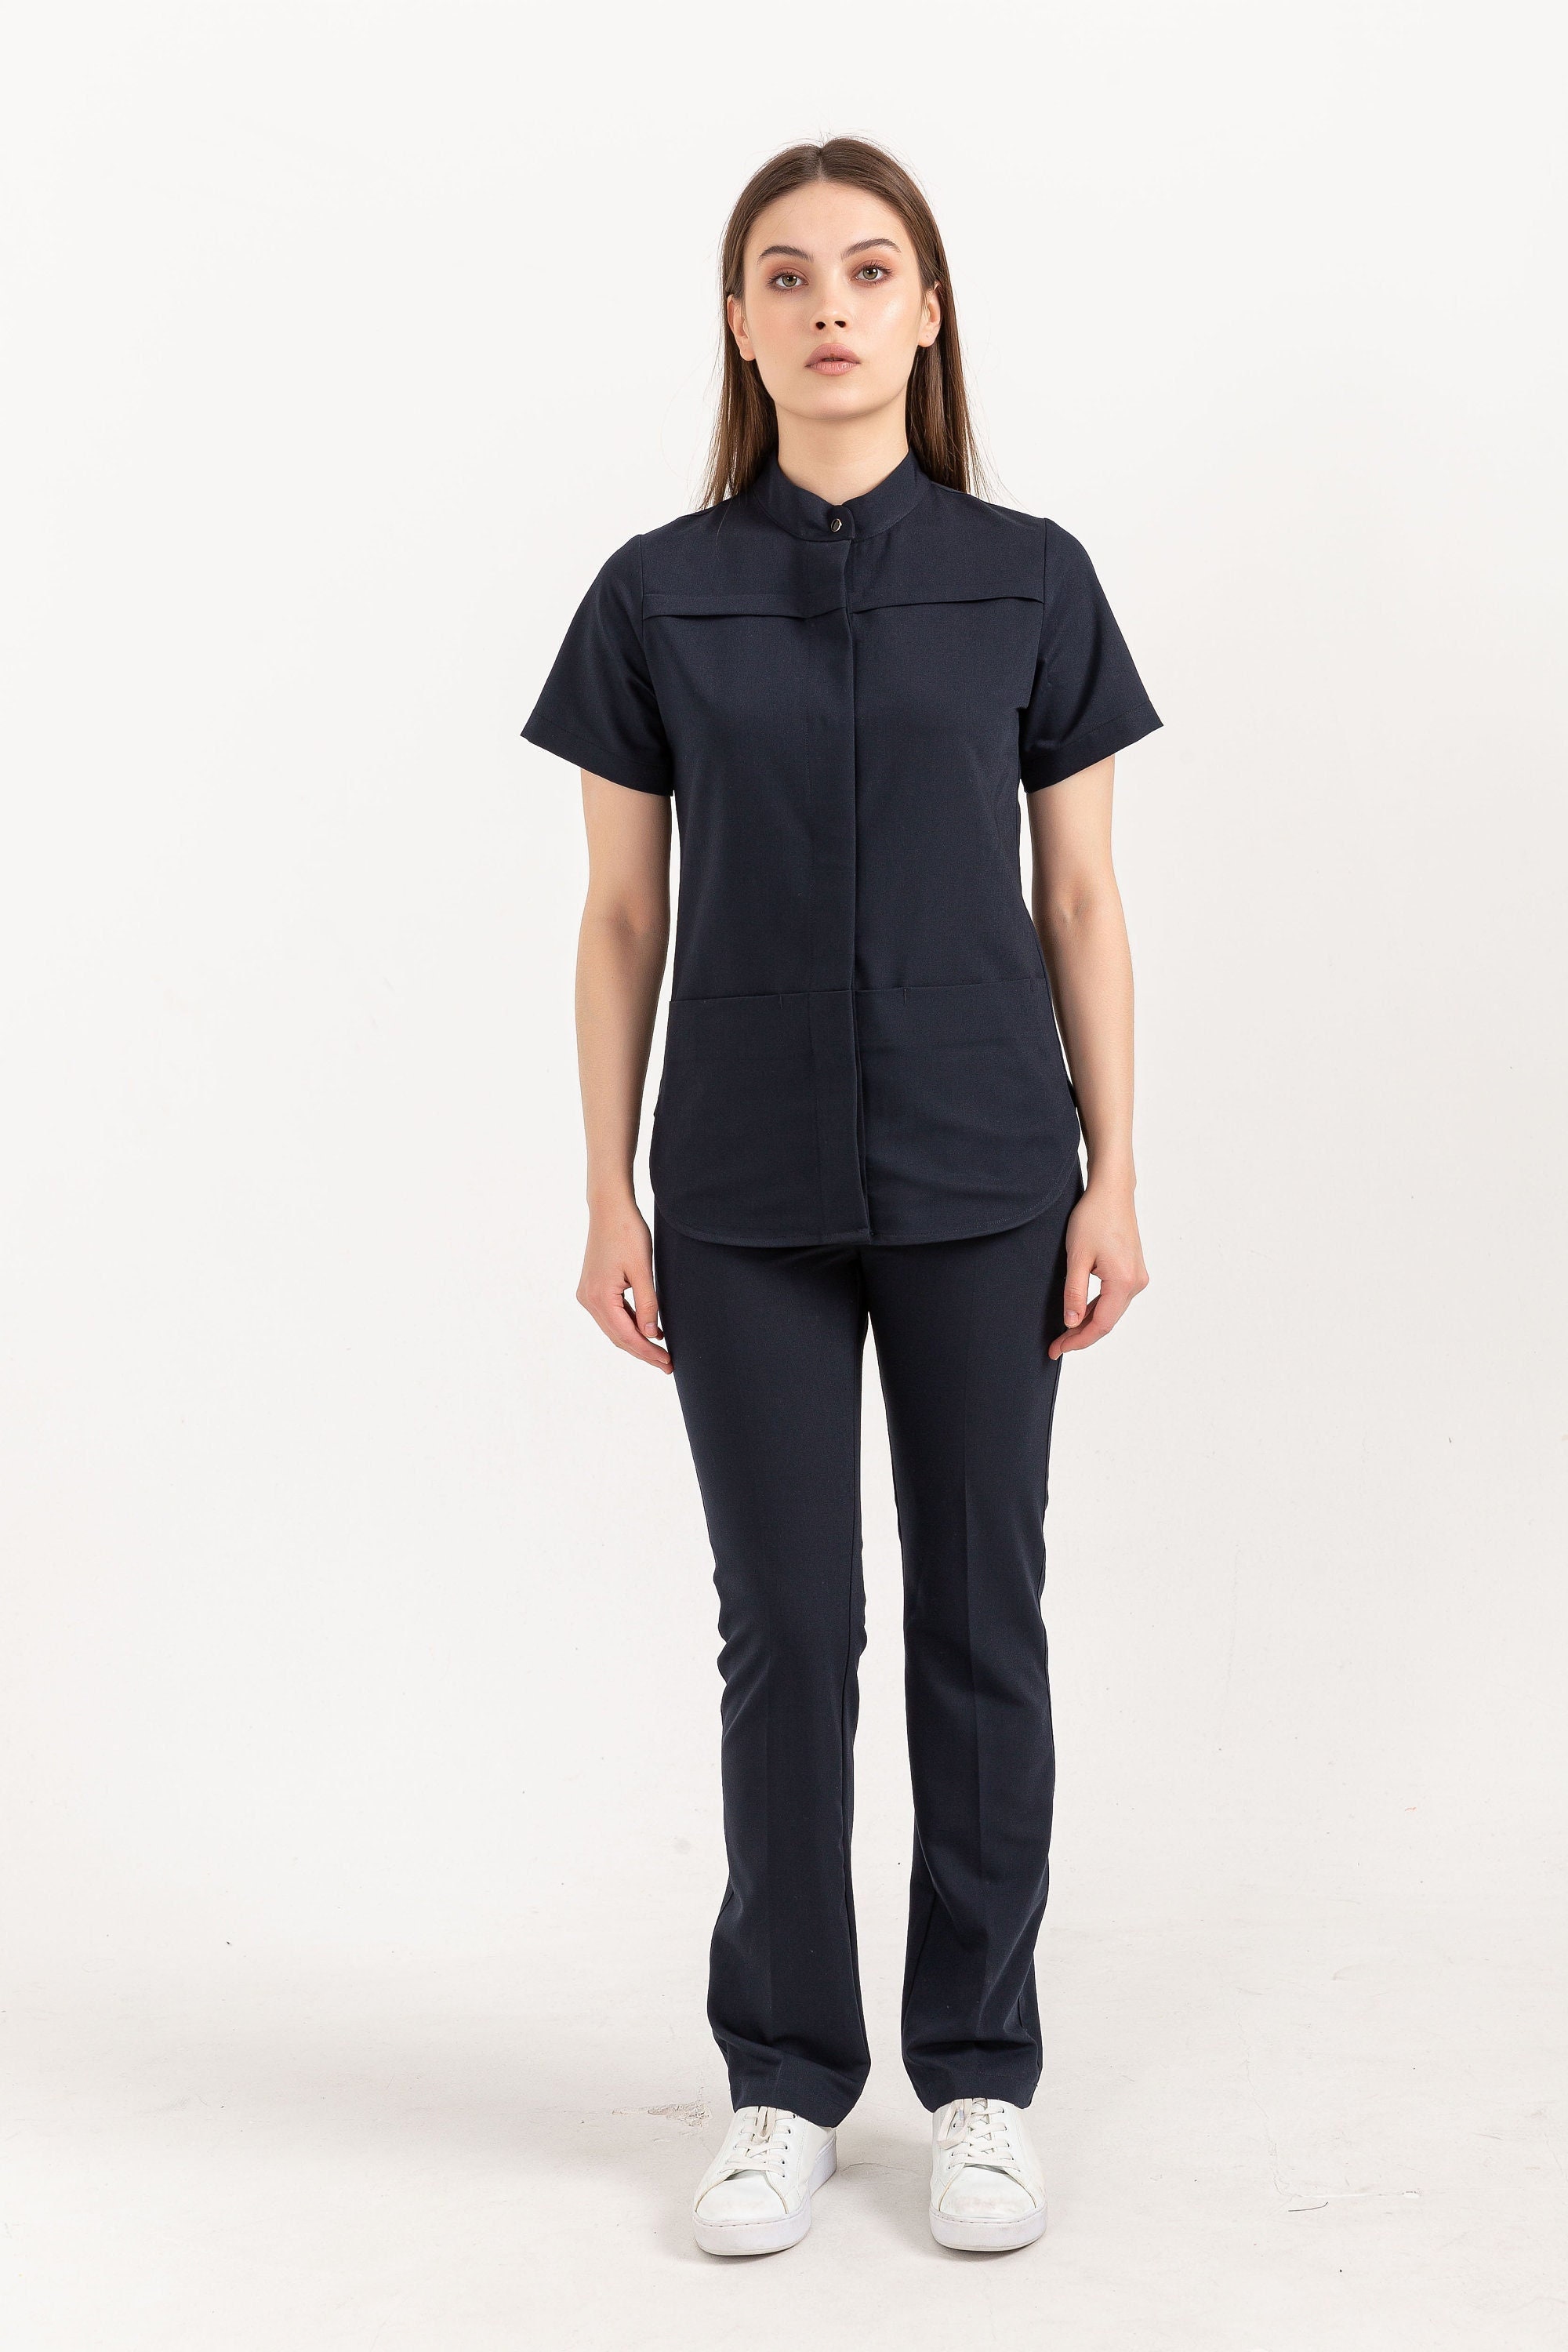 Navy Blue Jumpsuit Scrub Soft Stretch Fabric. Has Zipper at the